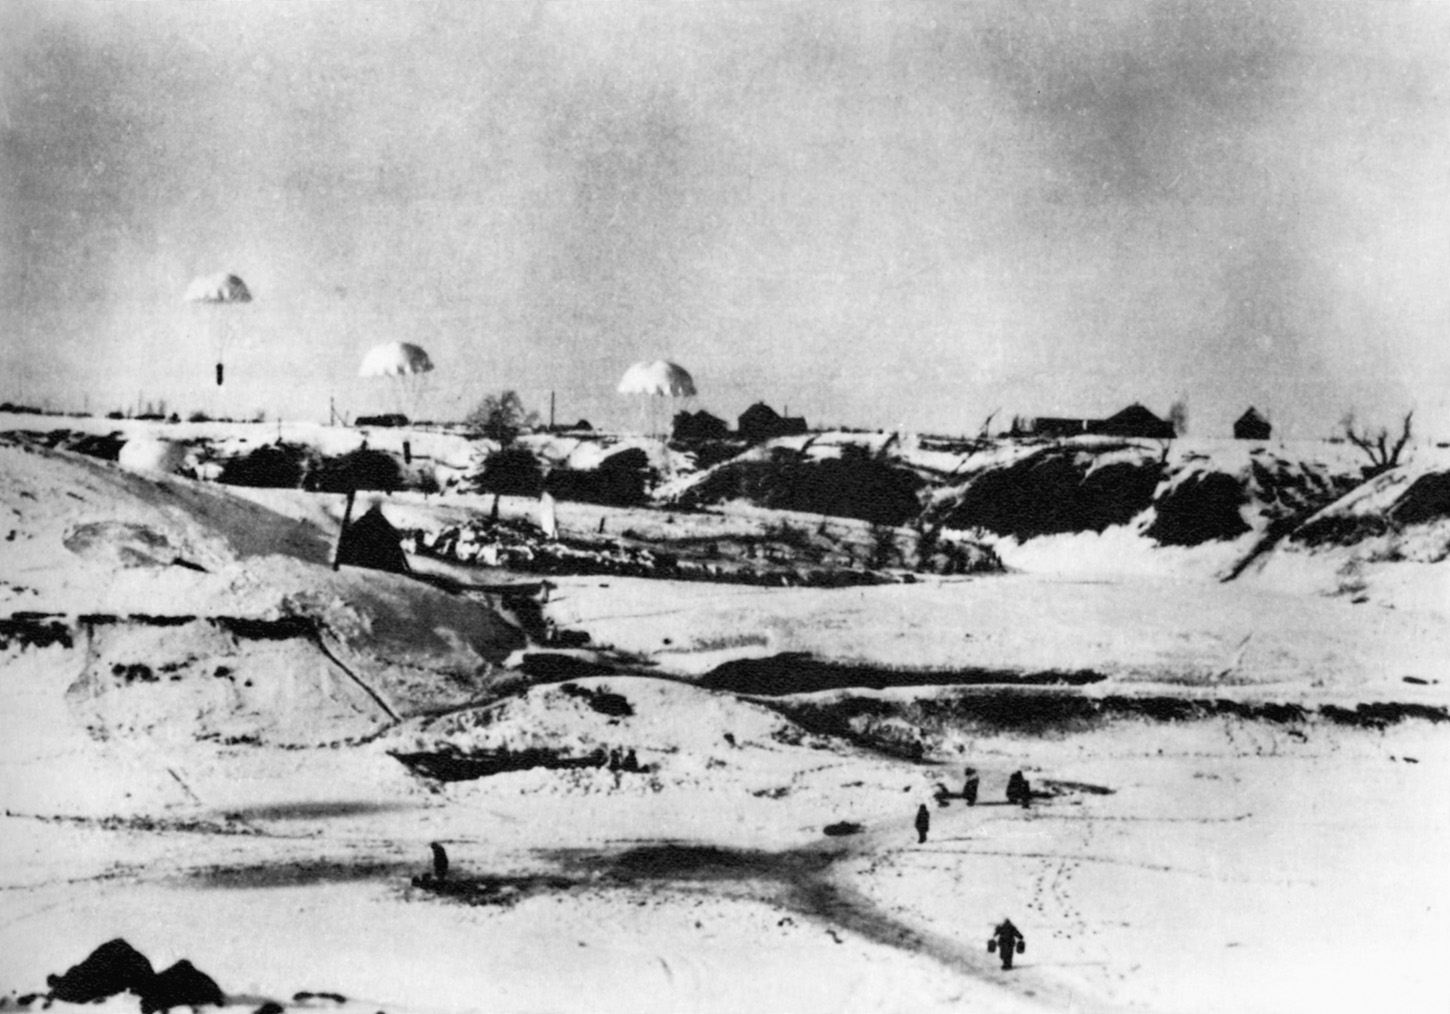 Despite numerous attempts by the Luftwaffe to supply those entrenched in the Demyansk pocket, their efforts proved to be an exercise in futility. On more than one occasion, valuable supplies parachuted directly into the hands of the Russians.